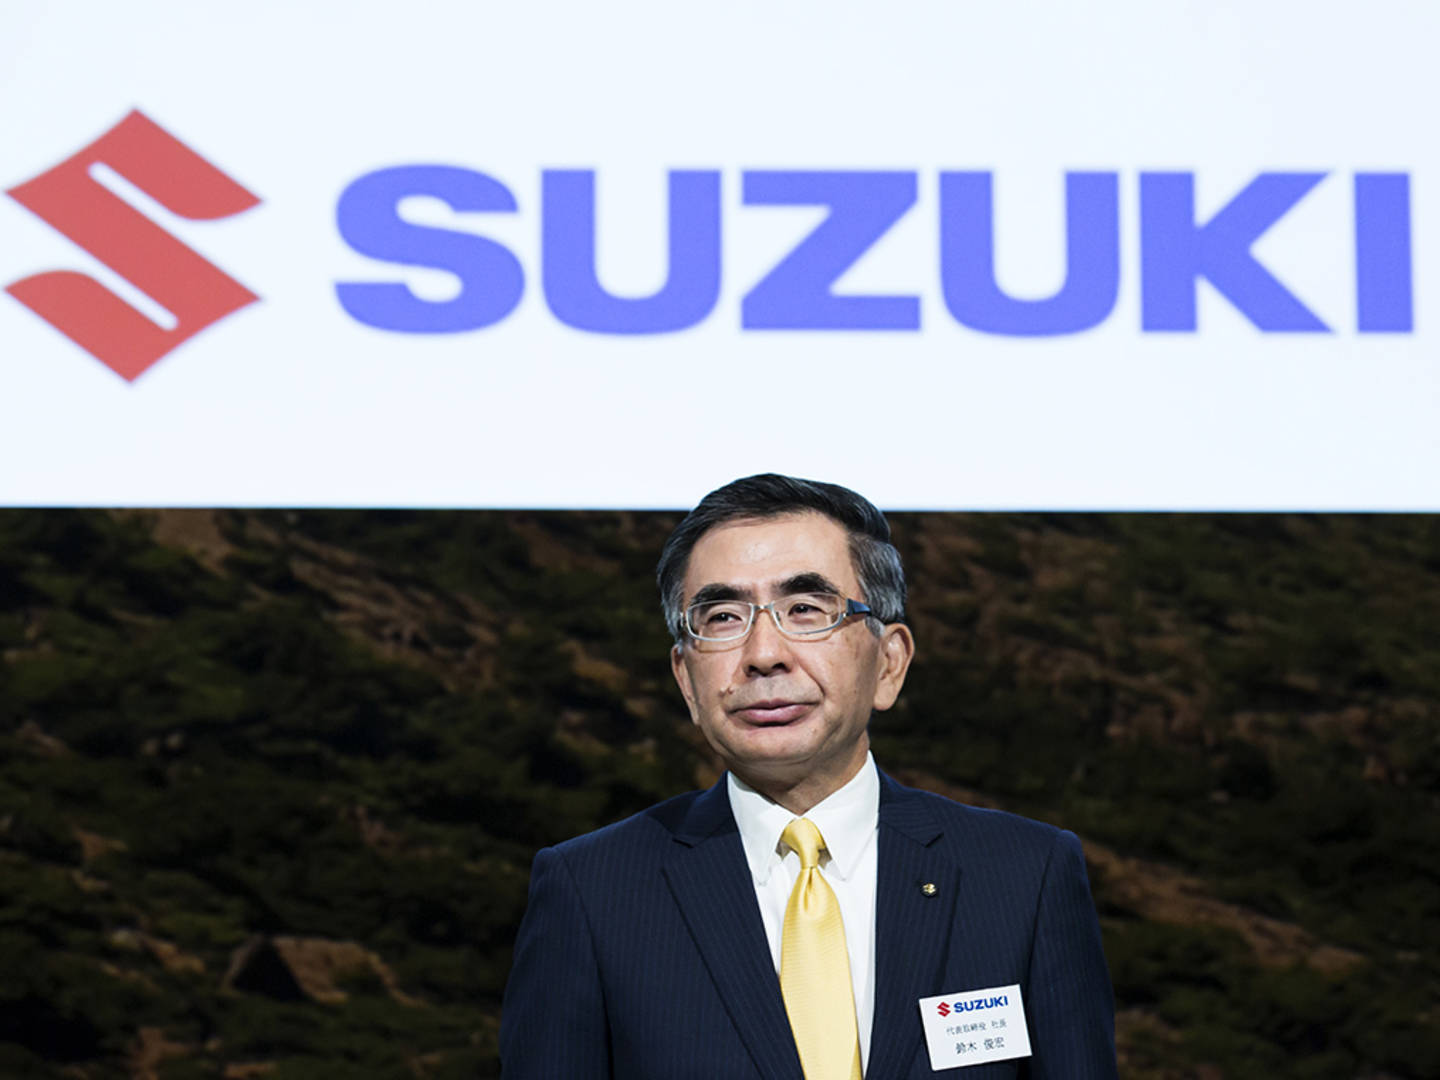 Suzuki wants to rev up India market share. But ageing portfolio, lag in EVs will be tight corners.